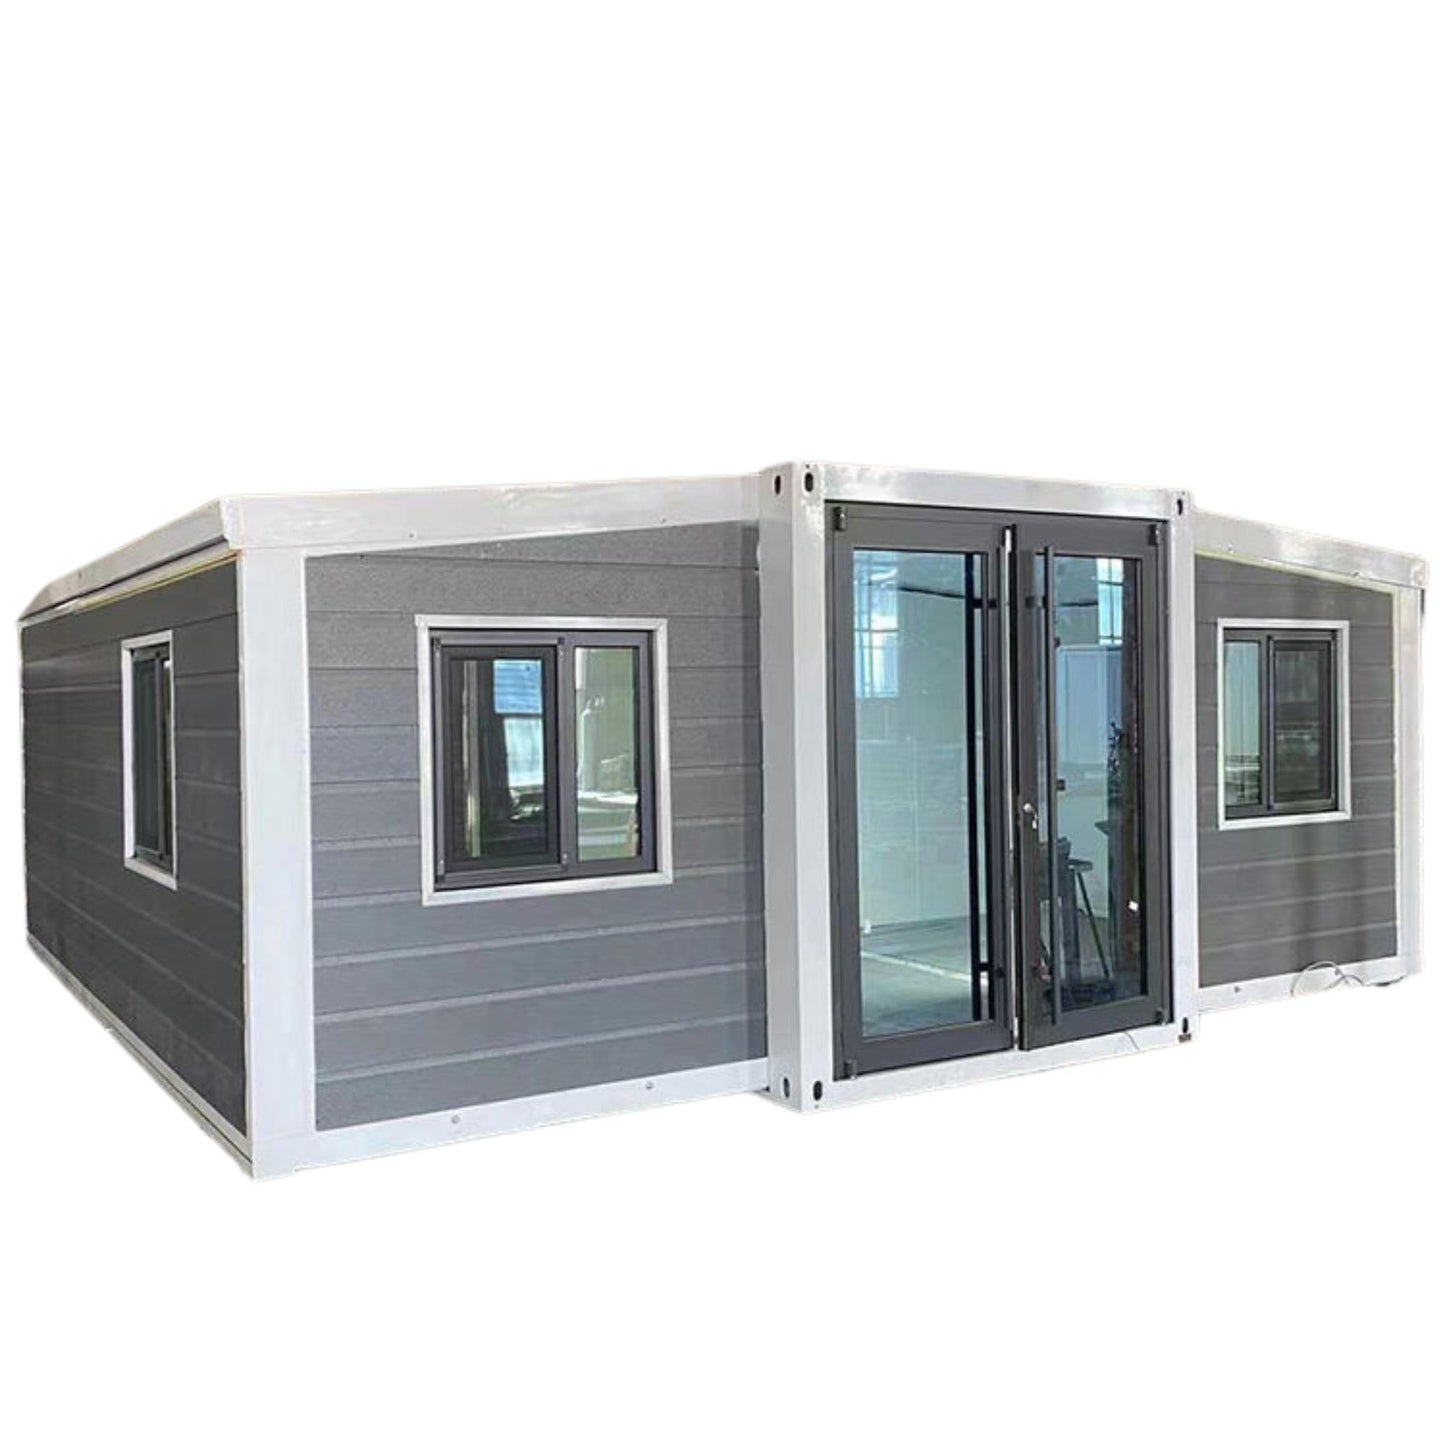 Portable Prefabricated House to Live in Tiny Home Mobile Expandable Prefab Foldable House for Hotel, Rent, S Guard, Hunting & Various Uses (20ft) (Grey)